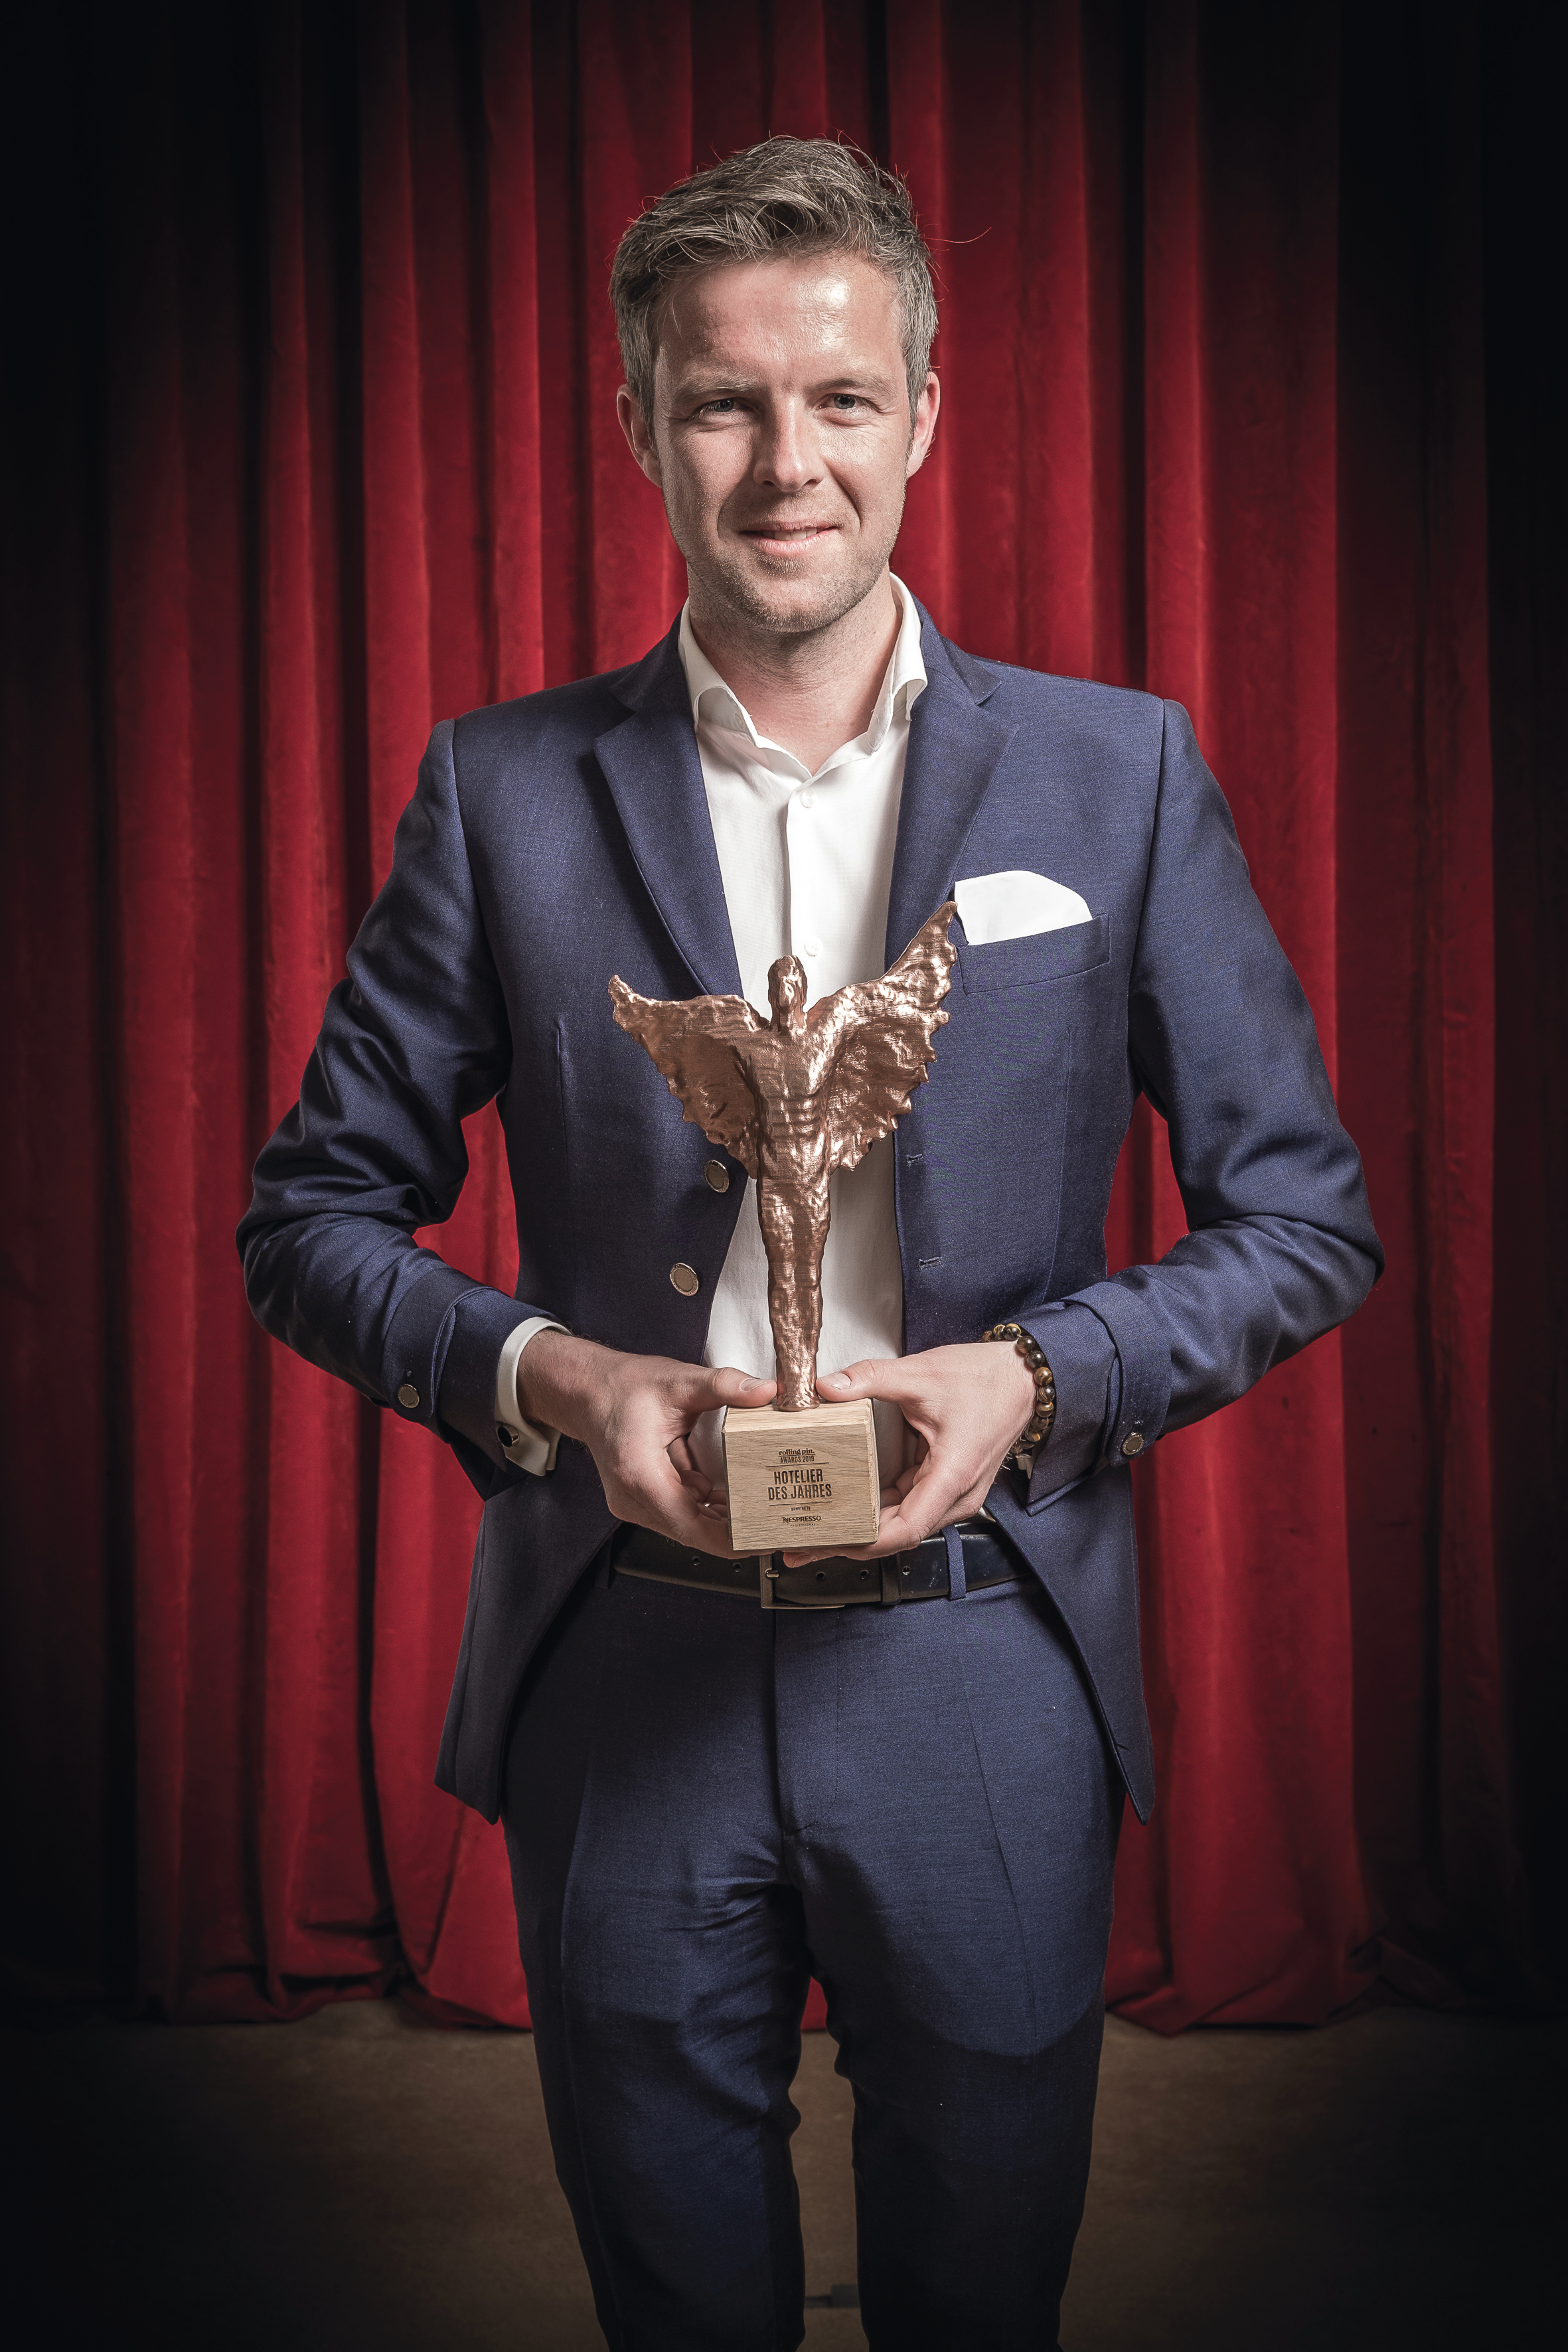 „And the Winner is…“: Josef Schwaiger is Hotelier of the Year 2019